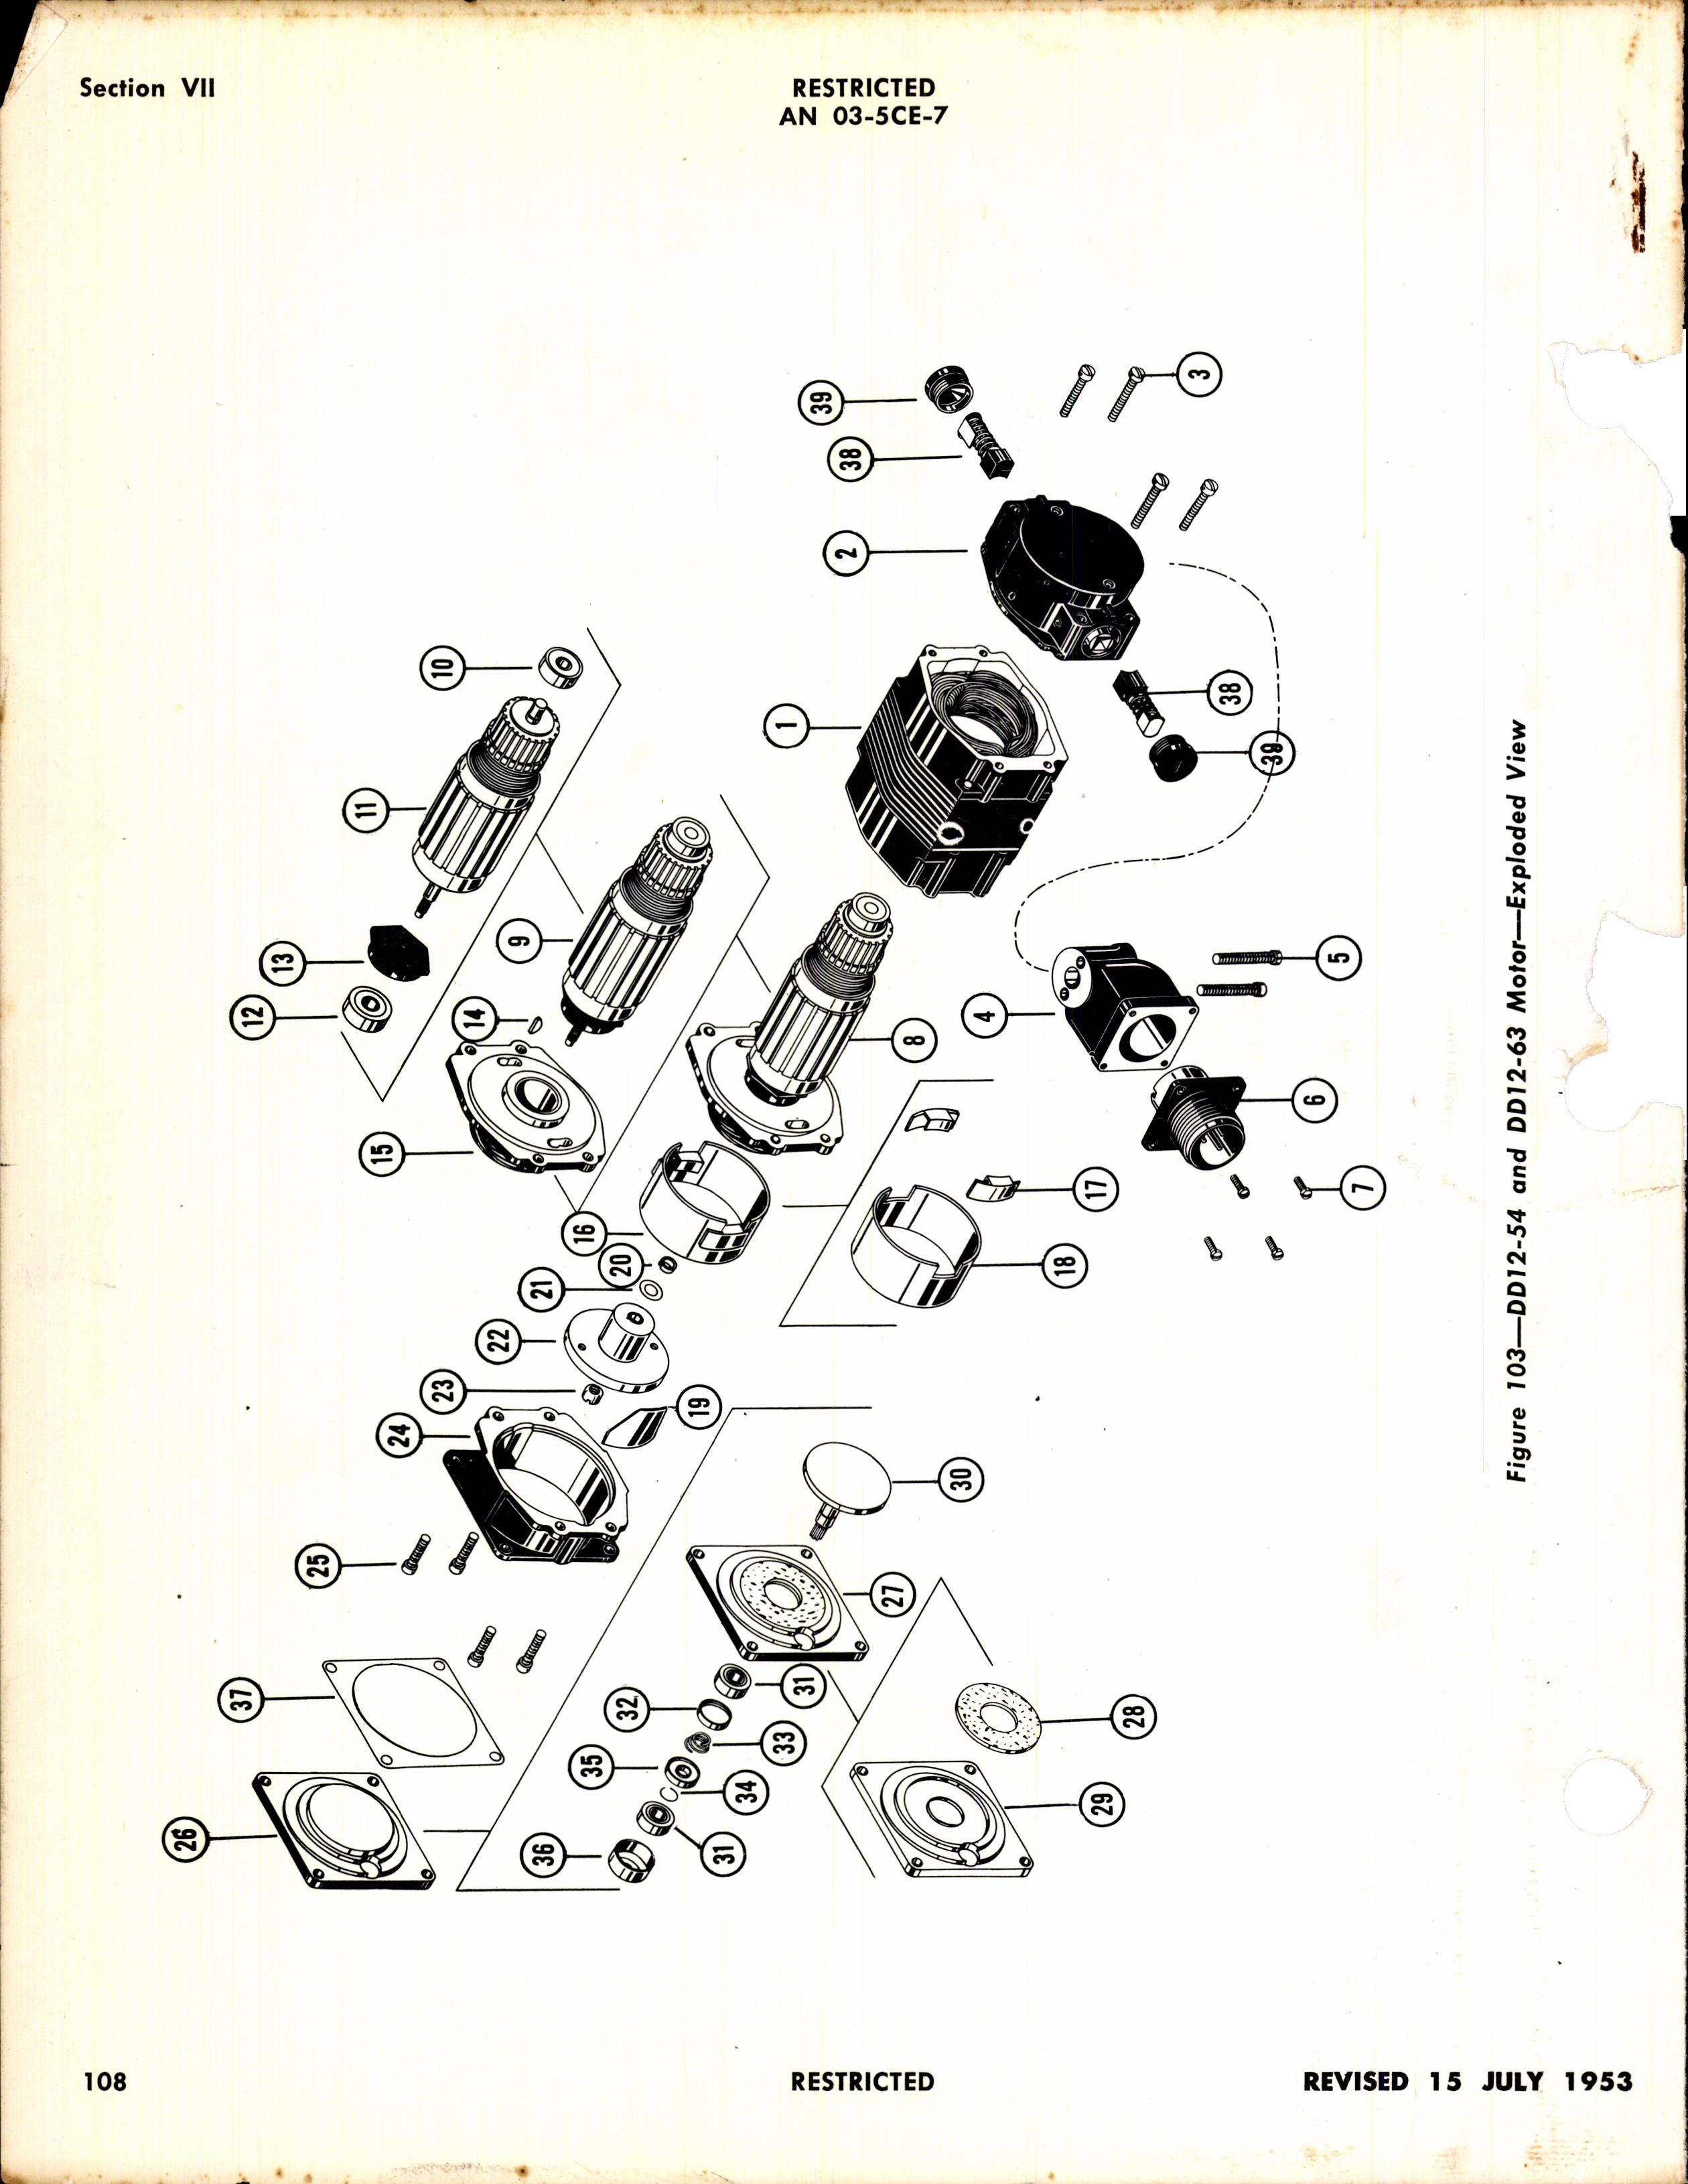 Sample page 4 from AirCorps Library document: Overhaul Instructions with Parts Catalog for Lear Rotary Actuators